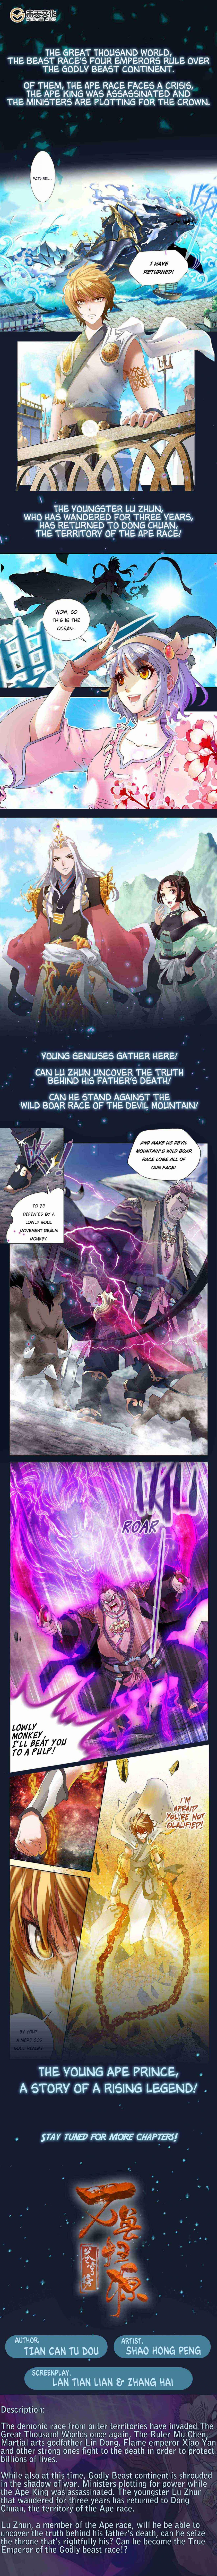 Fights Break Sphere – Return of The Beasts Ch. 0 Prologue